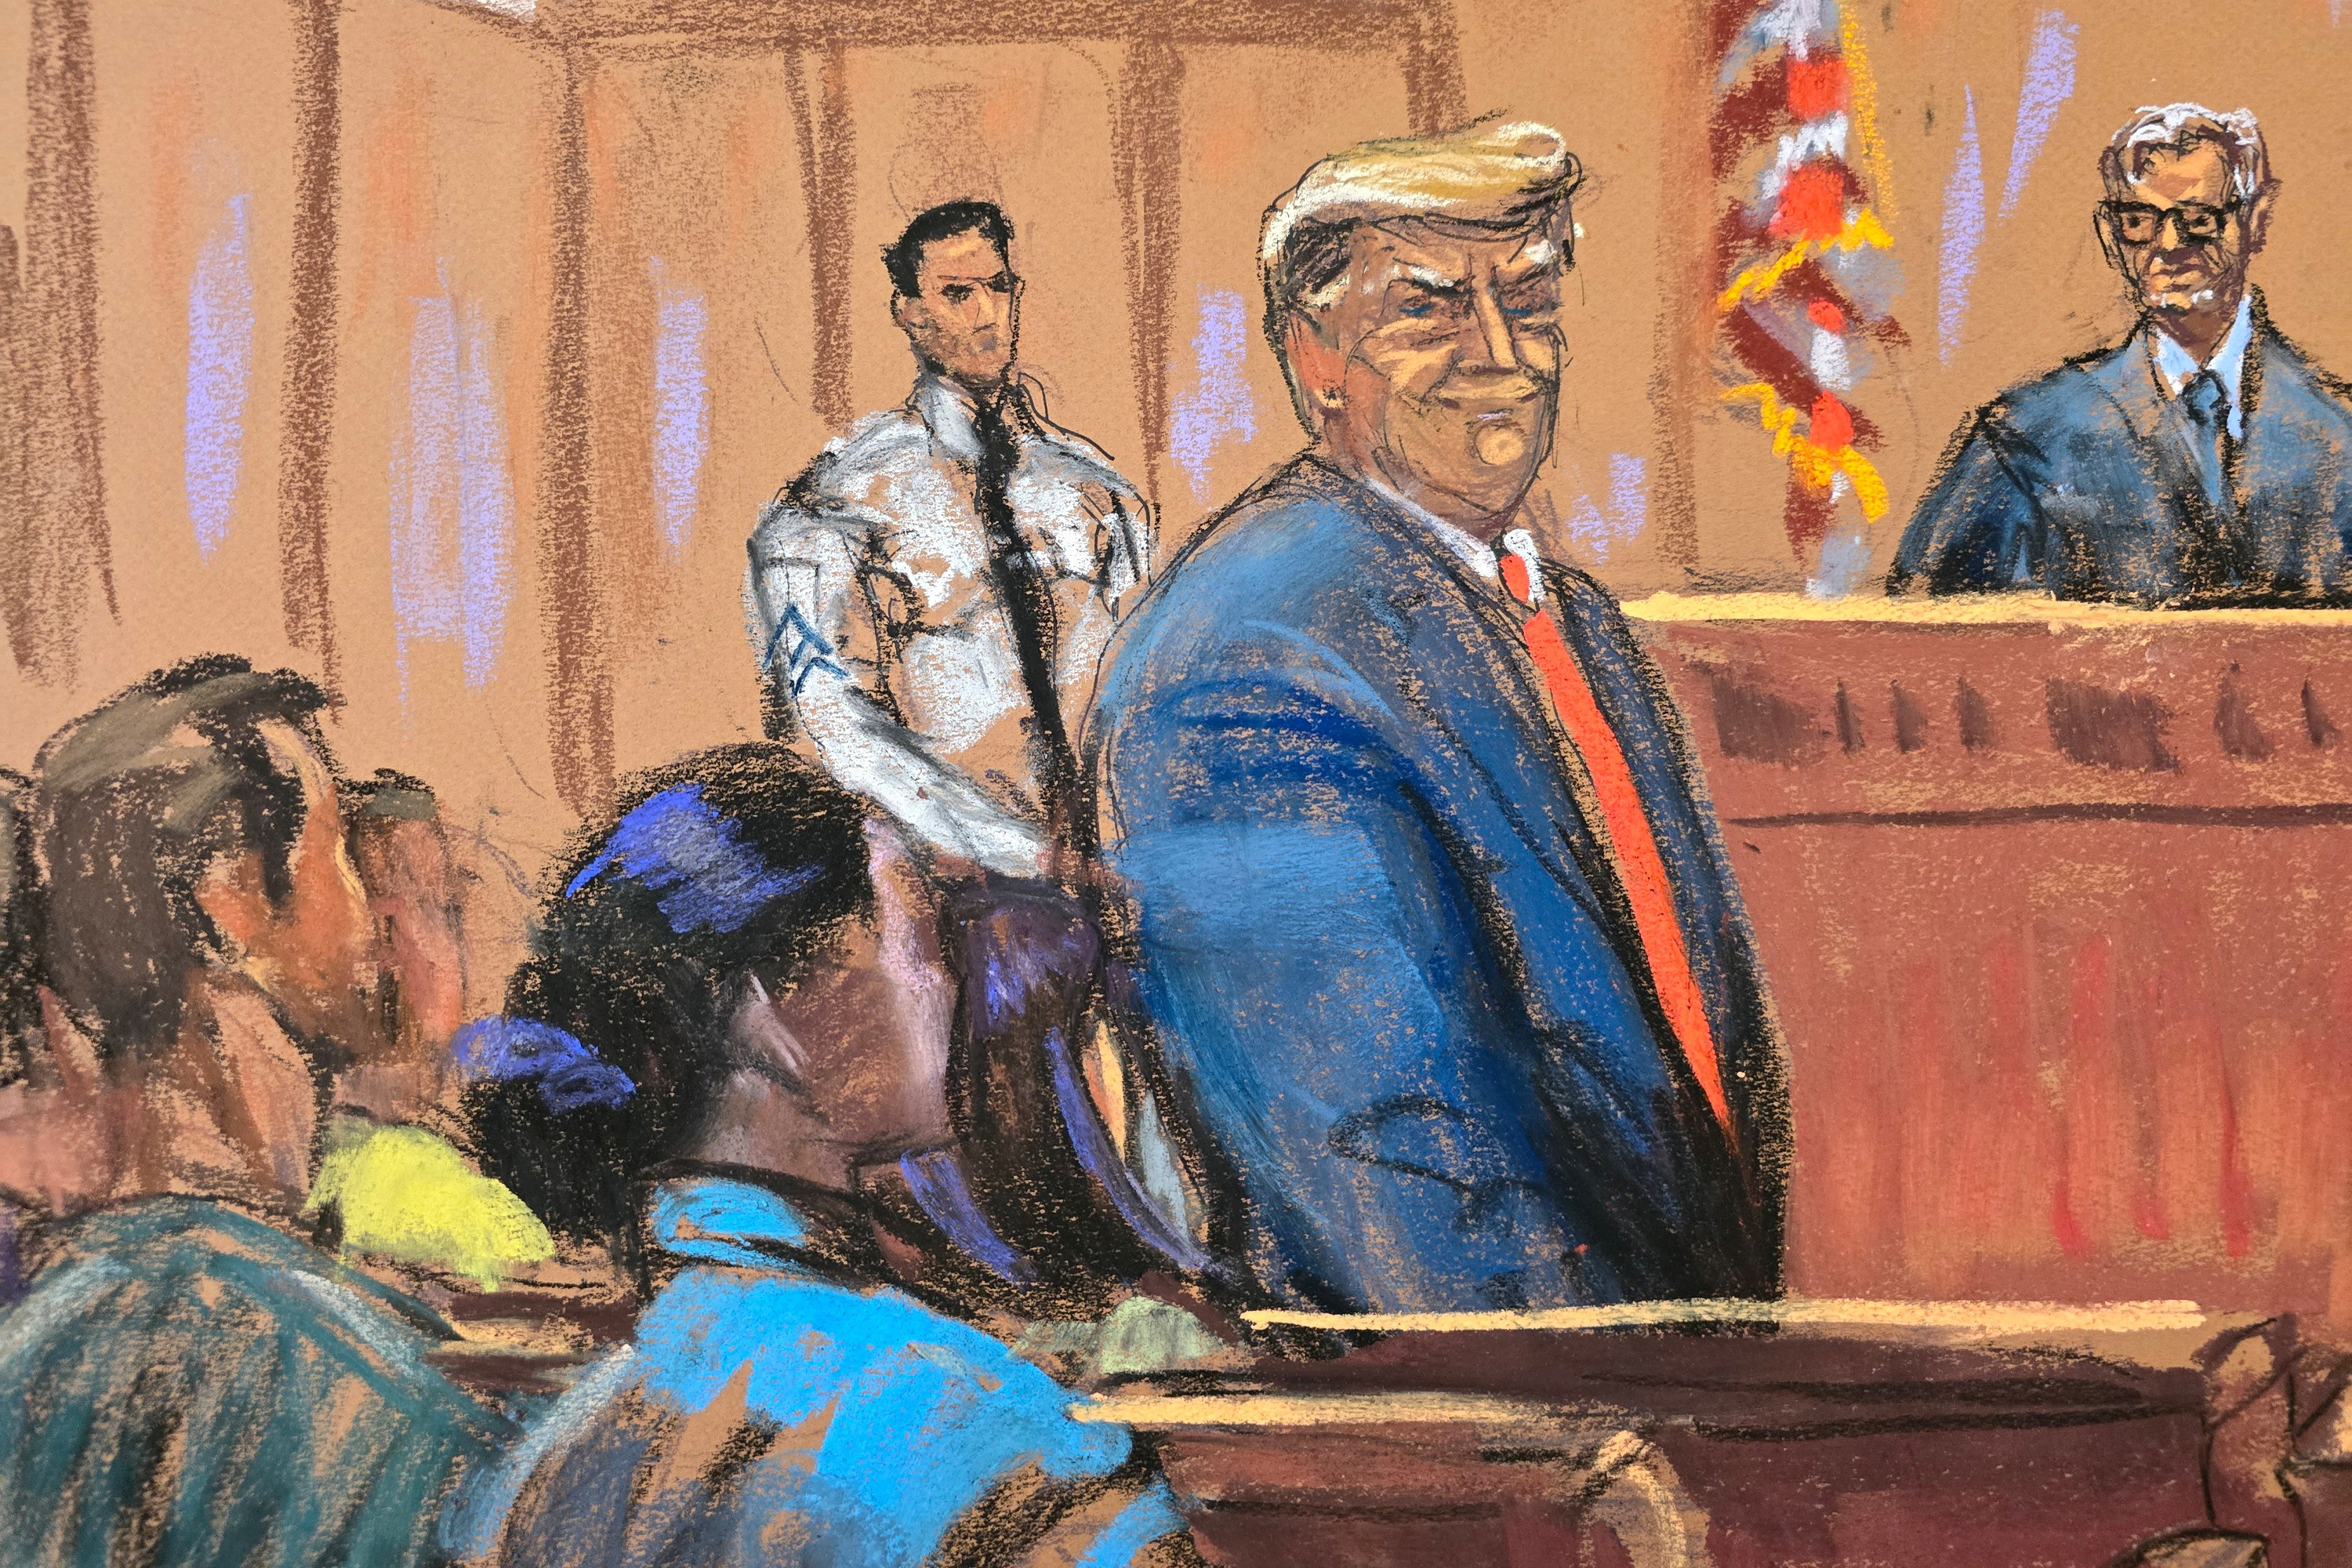 Former U.S. President Donald Trump appears at a court hearing in New York